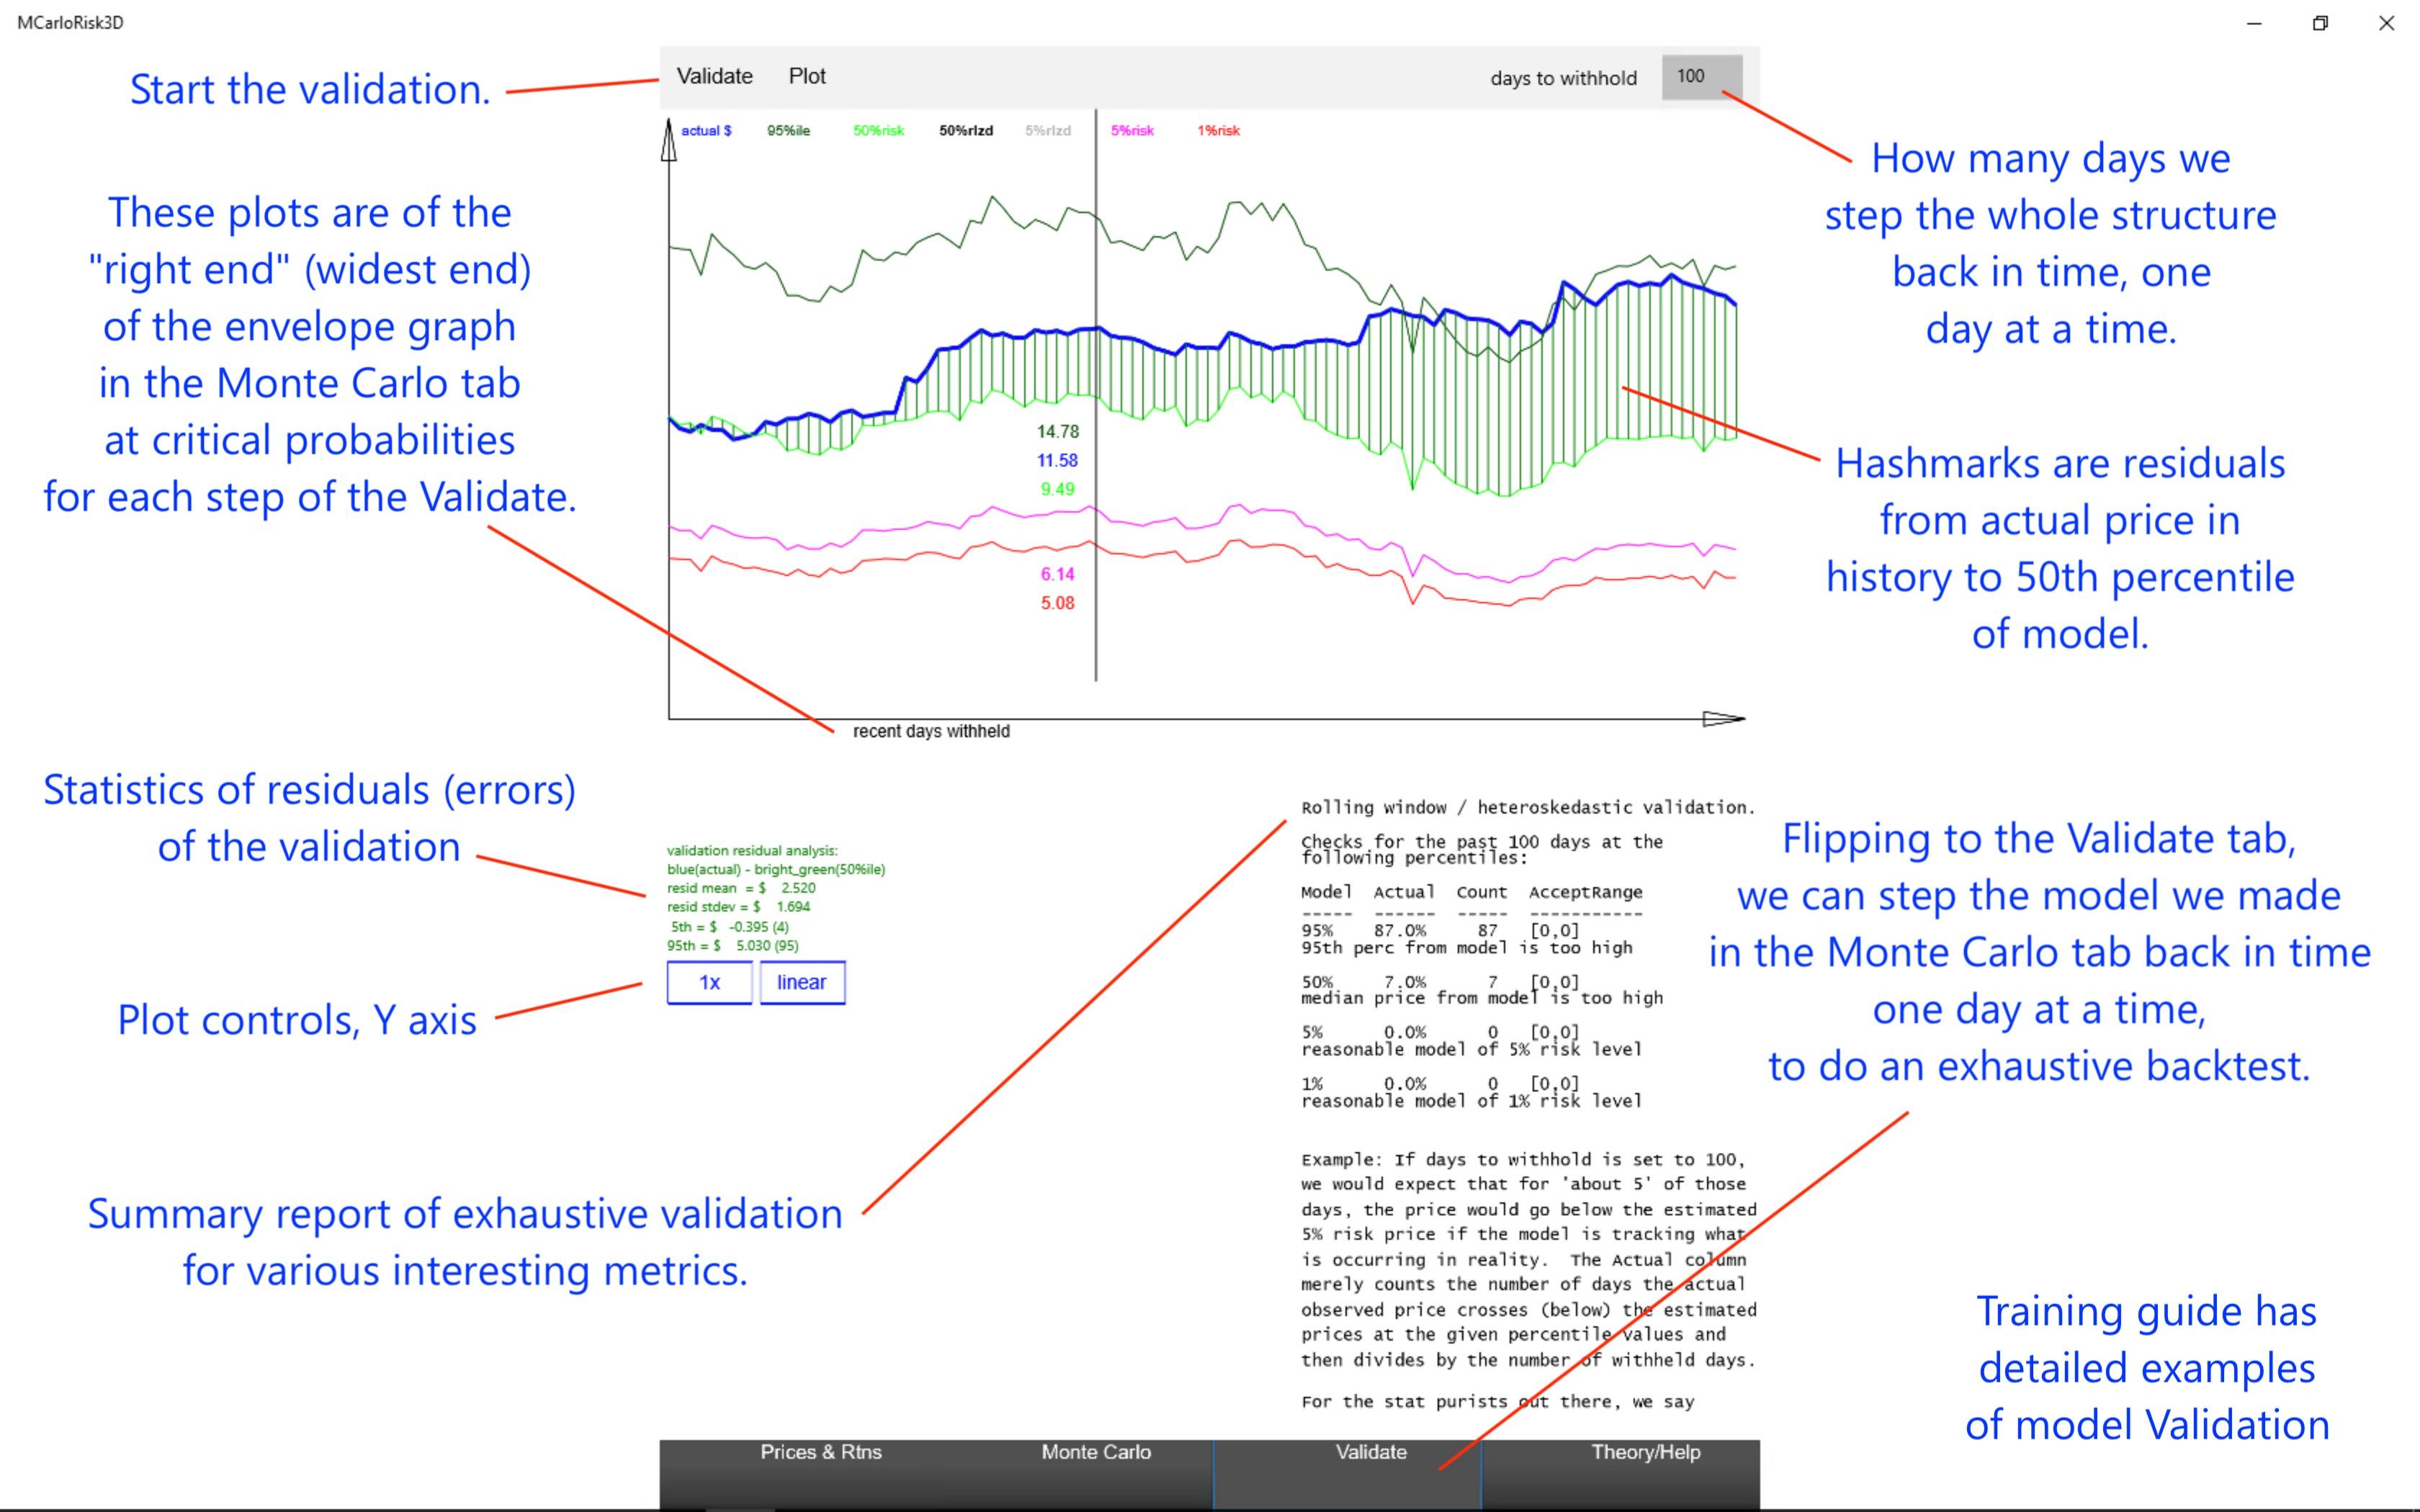 Once you have a good bulk backtest, you can do exhaustive Validation of this model by stepping it back in time, one day at a time, and viewing aggregate results in plot and report forms.